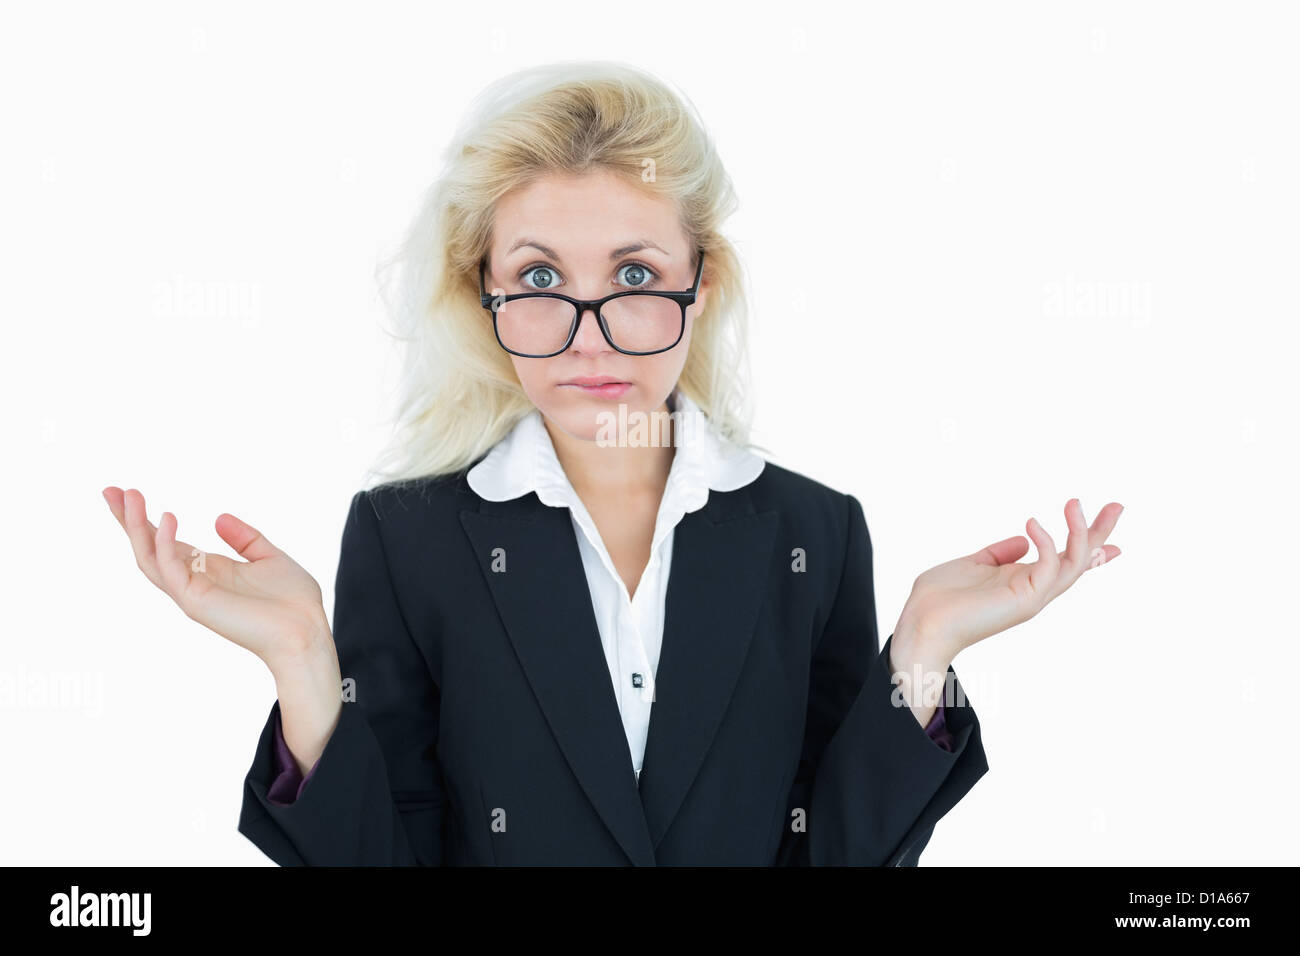 Portrait of a business woman gesturing do not know sign Stock Photo